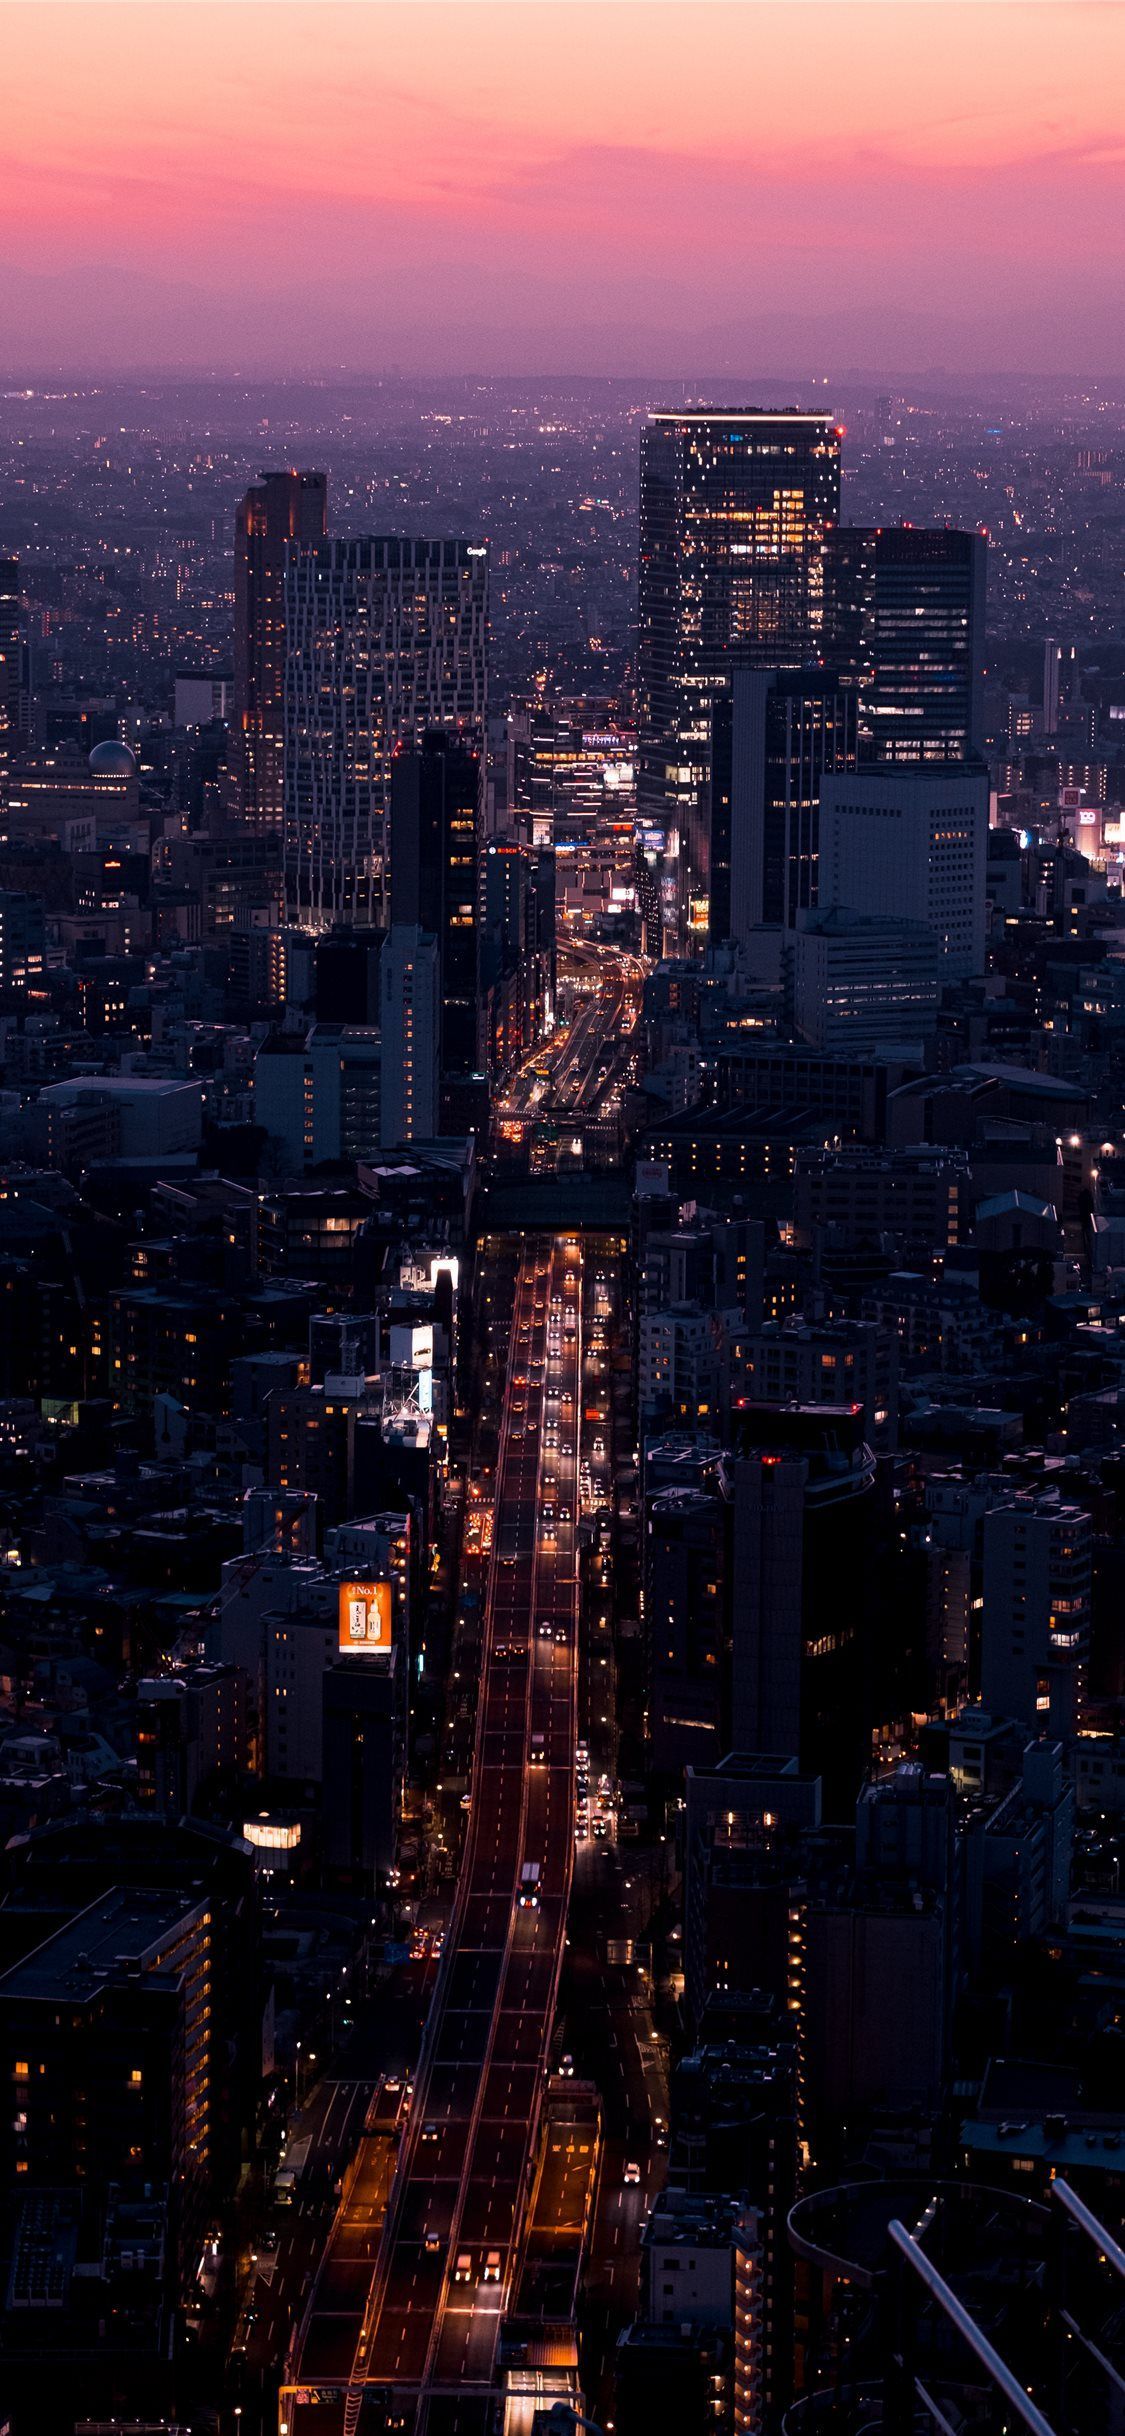 aerial view of city buildings during night time #landscape #nature #scenery #city #grey #iPhone11Wal. City wallpaper, iPhone wallpaper photography, View wallpaper